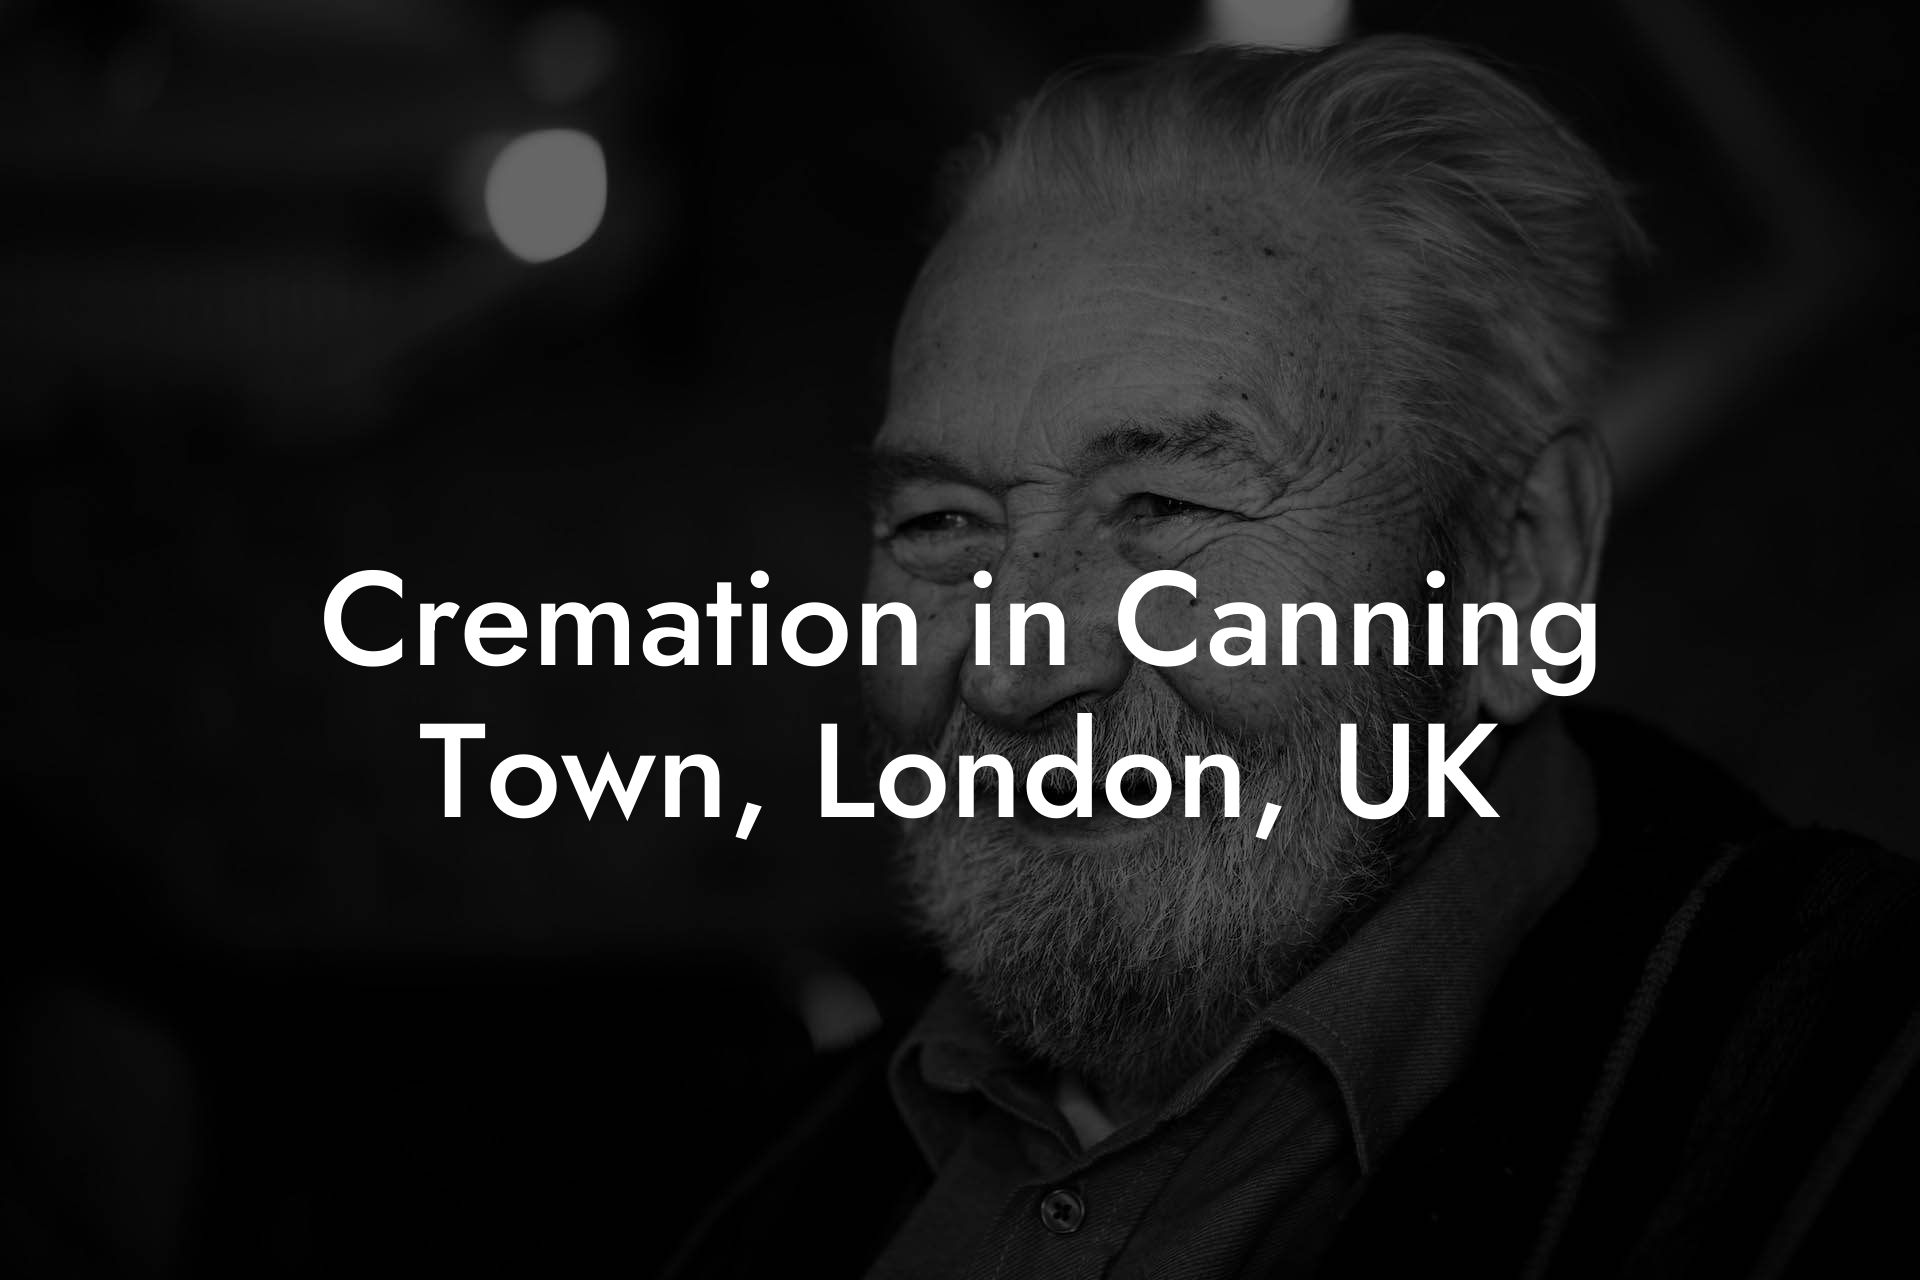 Cremation in Canning Town, London, UK